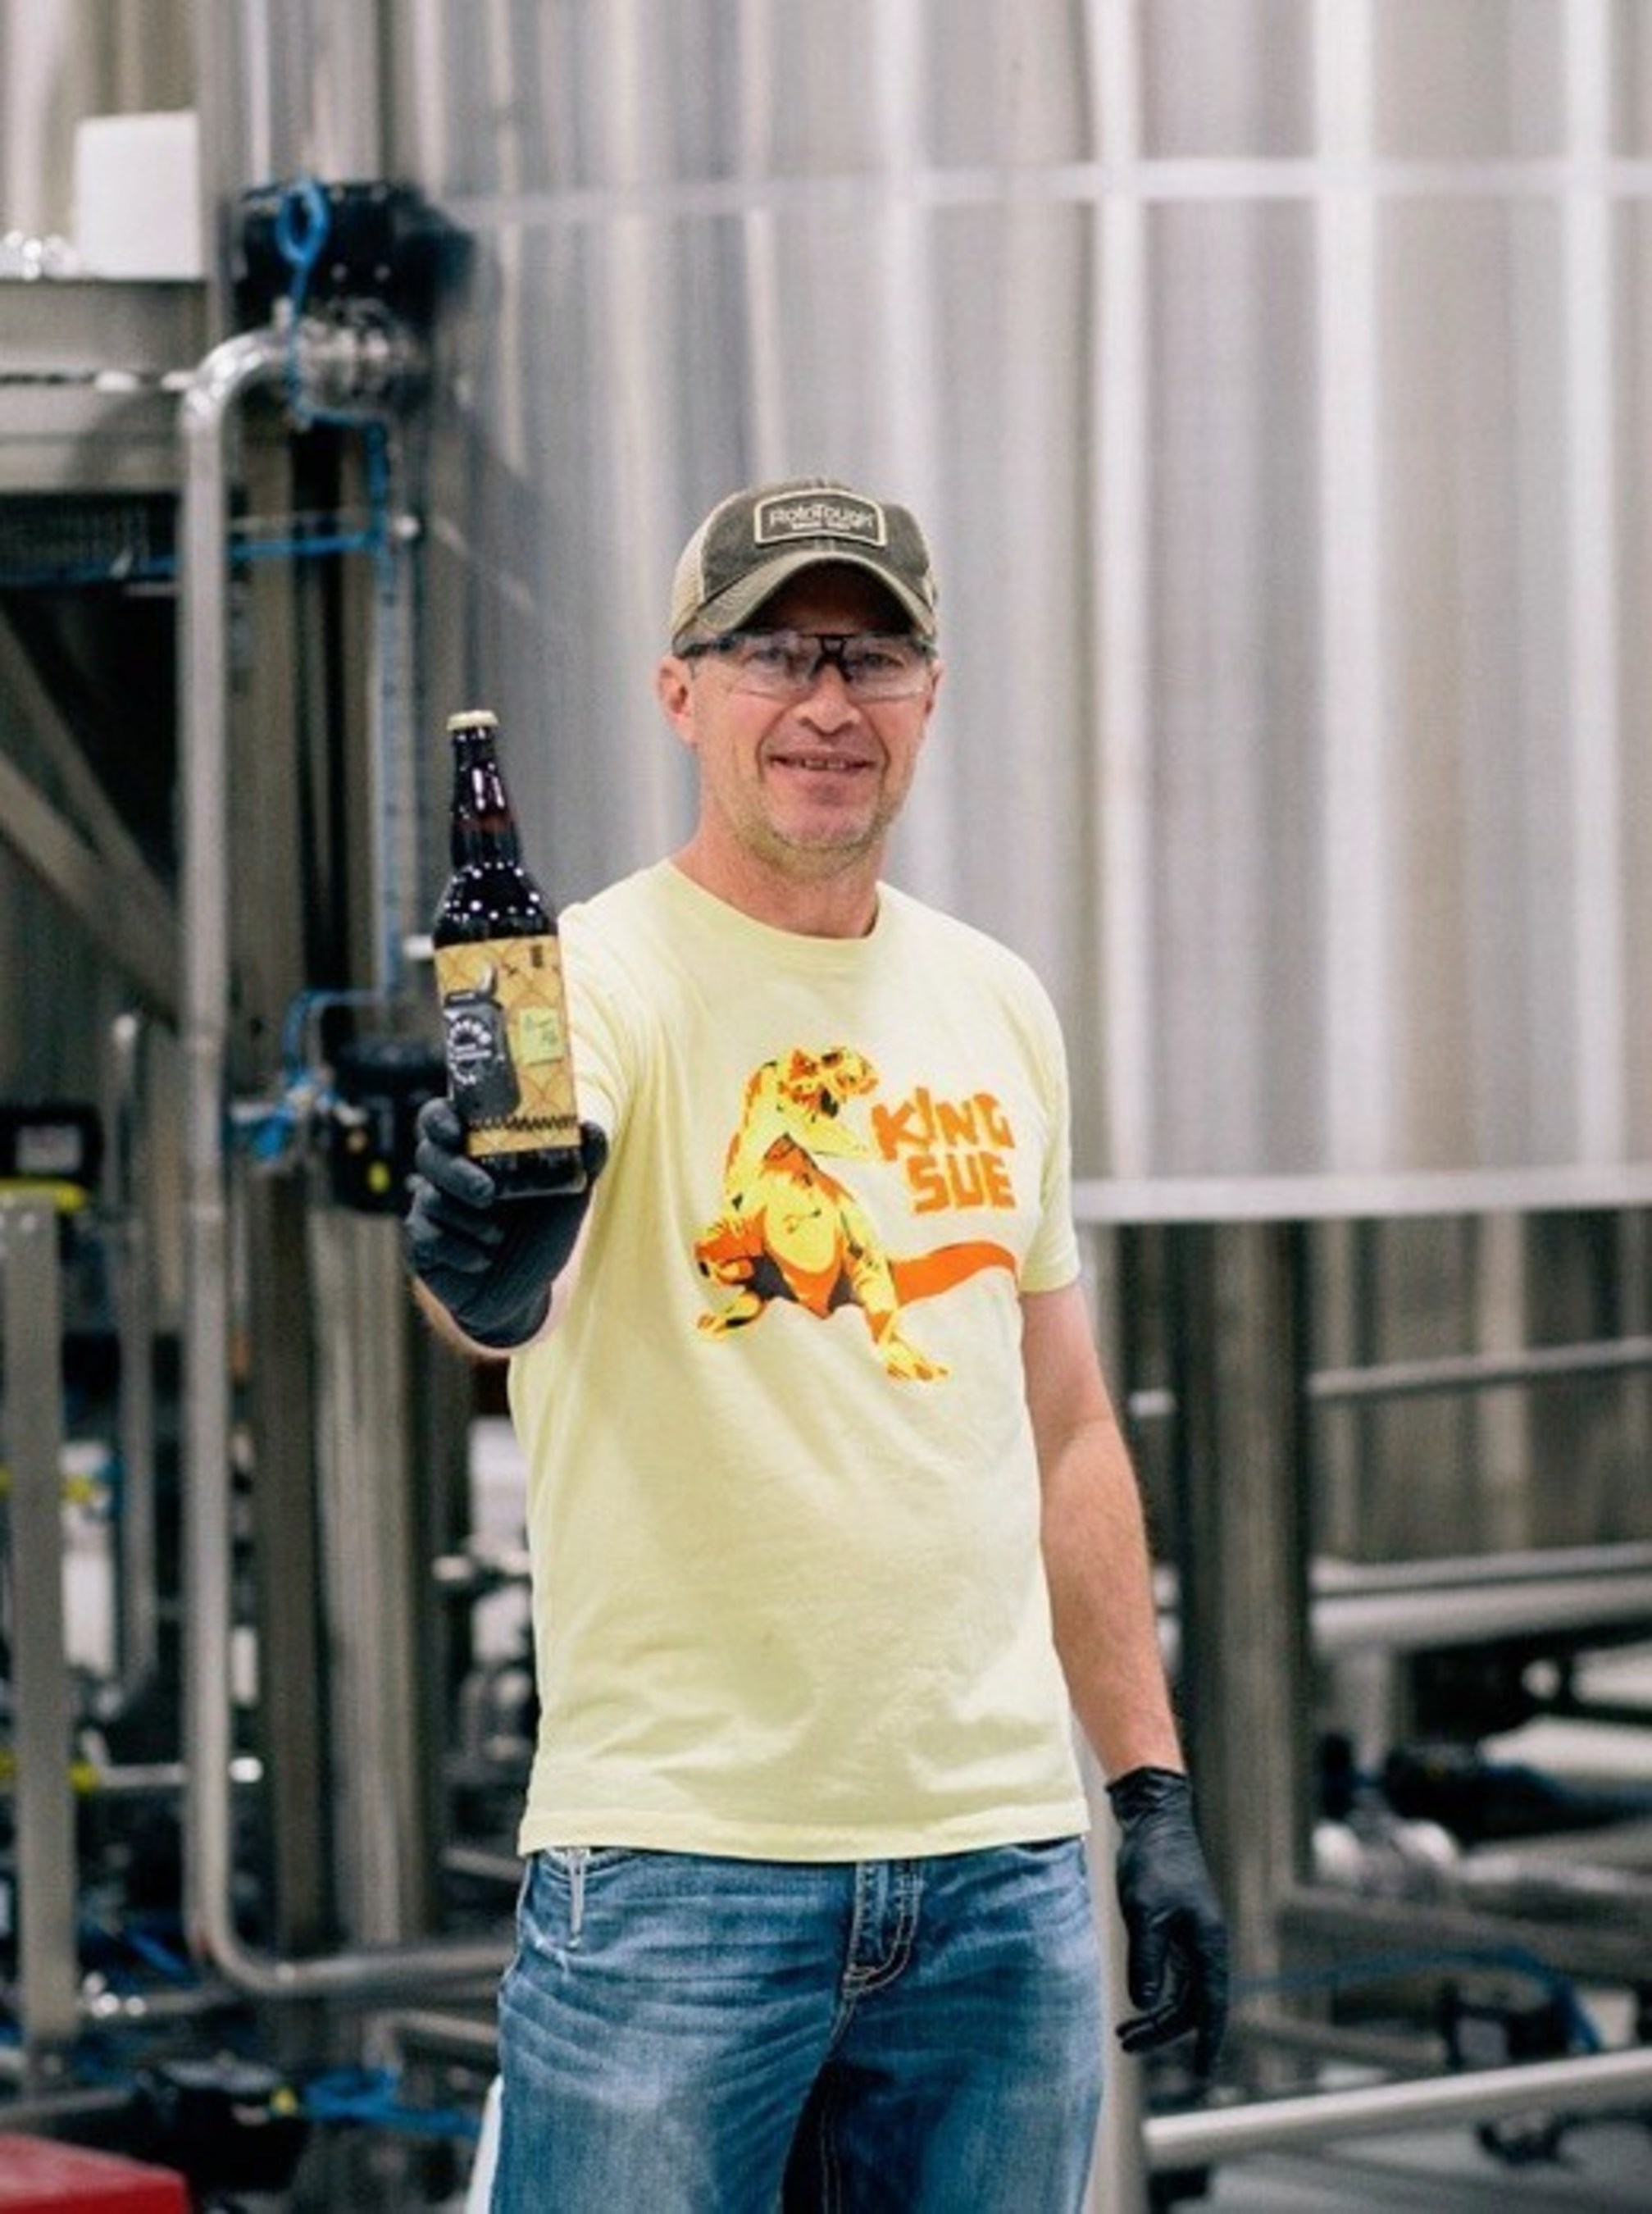 Clark Lewey, co-founder of Toppling Goliath Brewing, at the brewery in Decorah, Iowa.